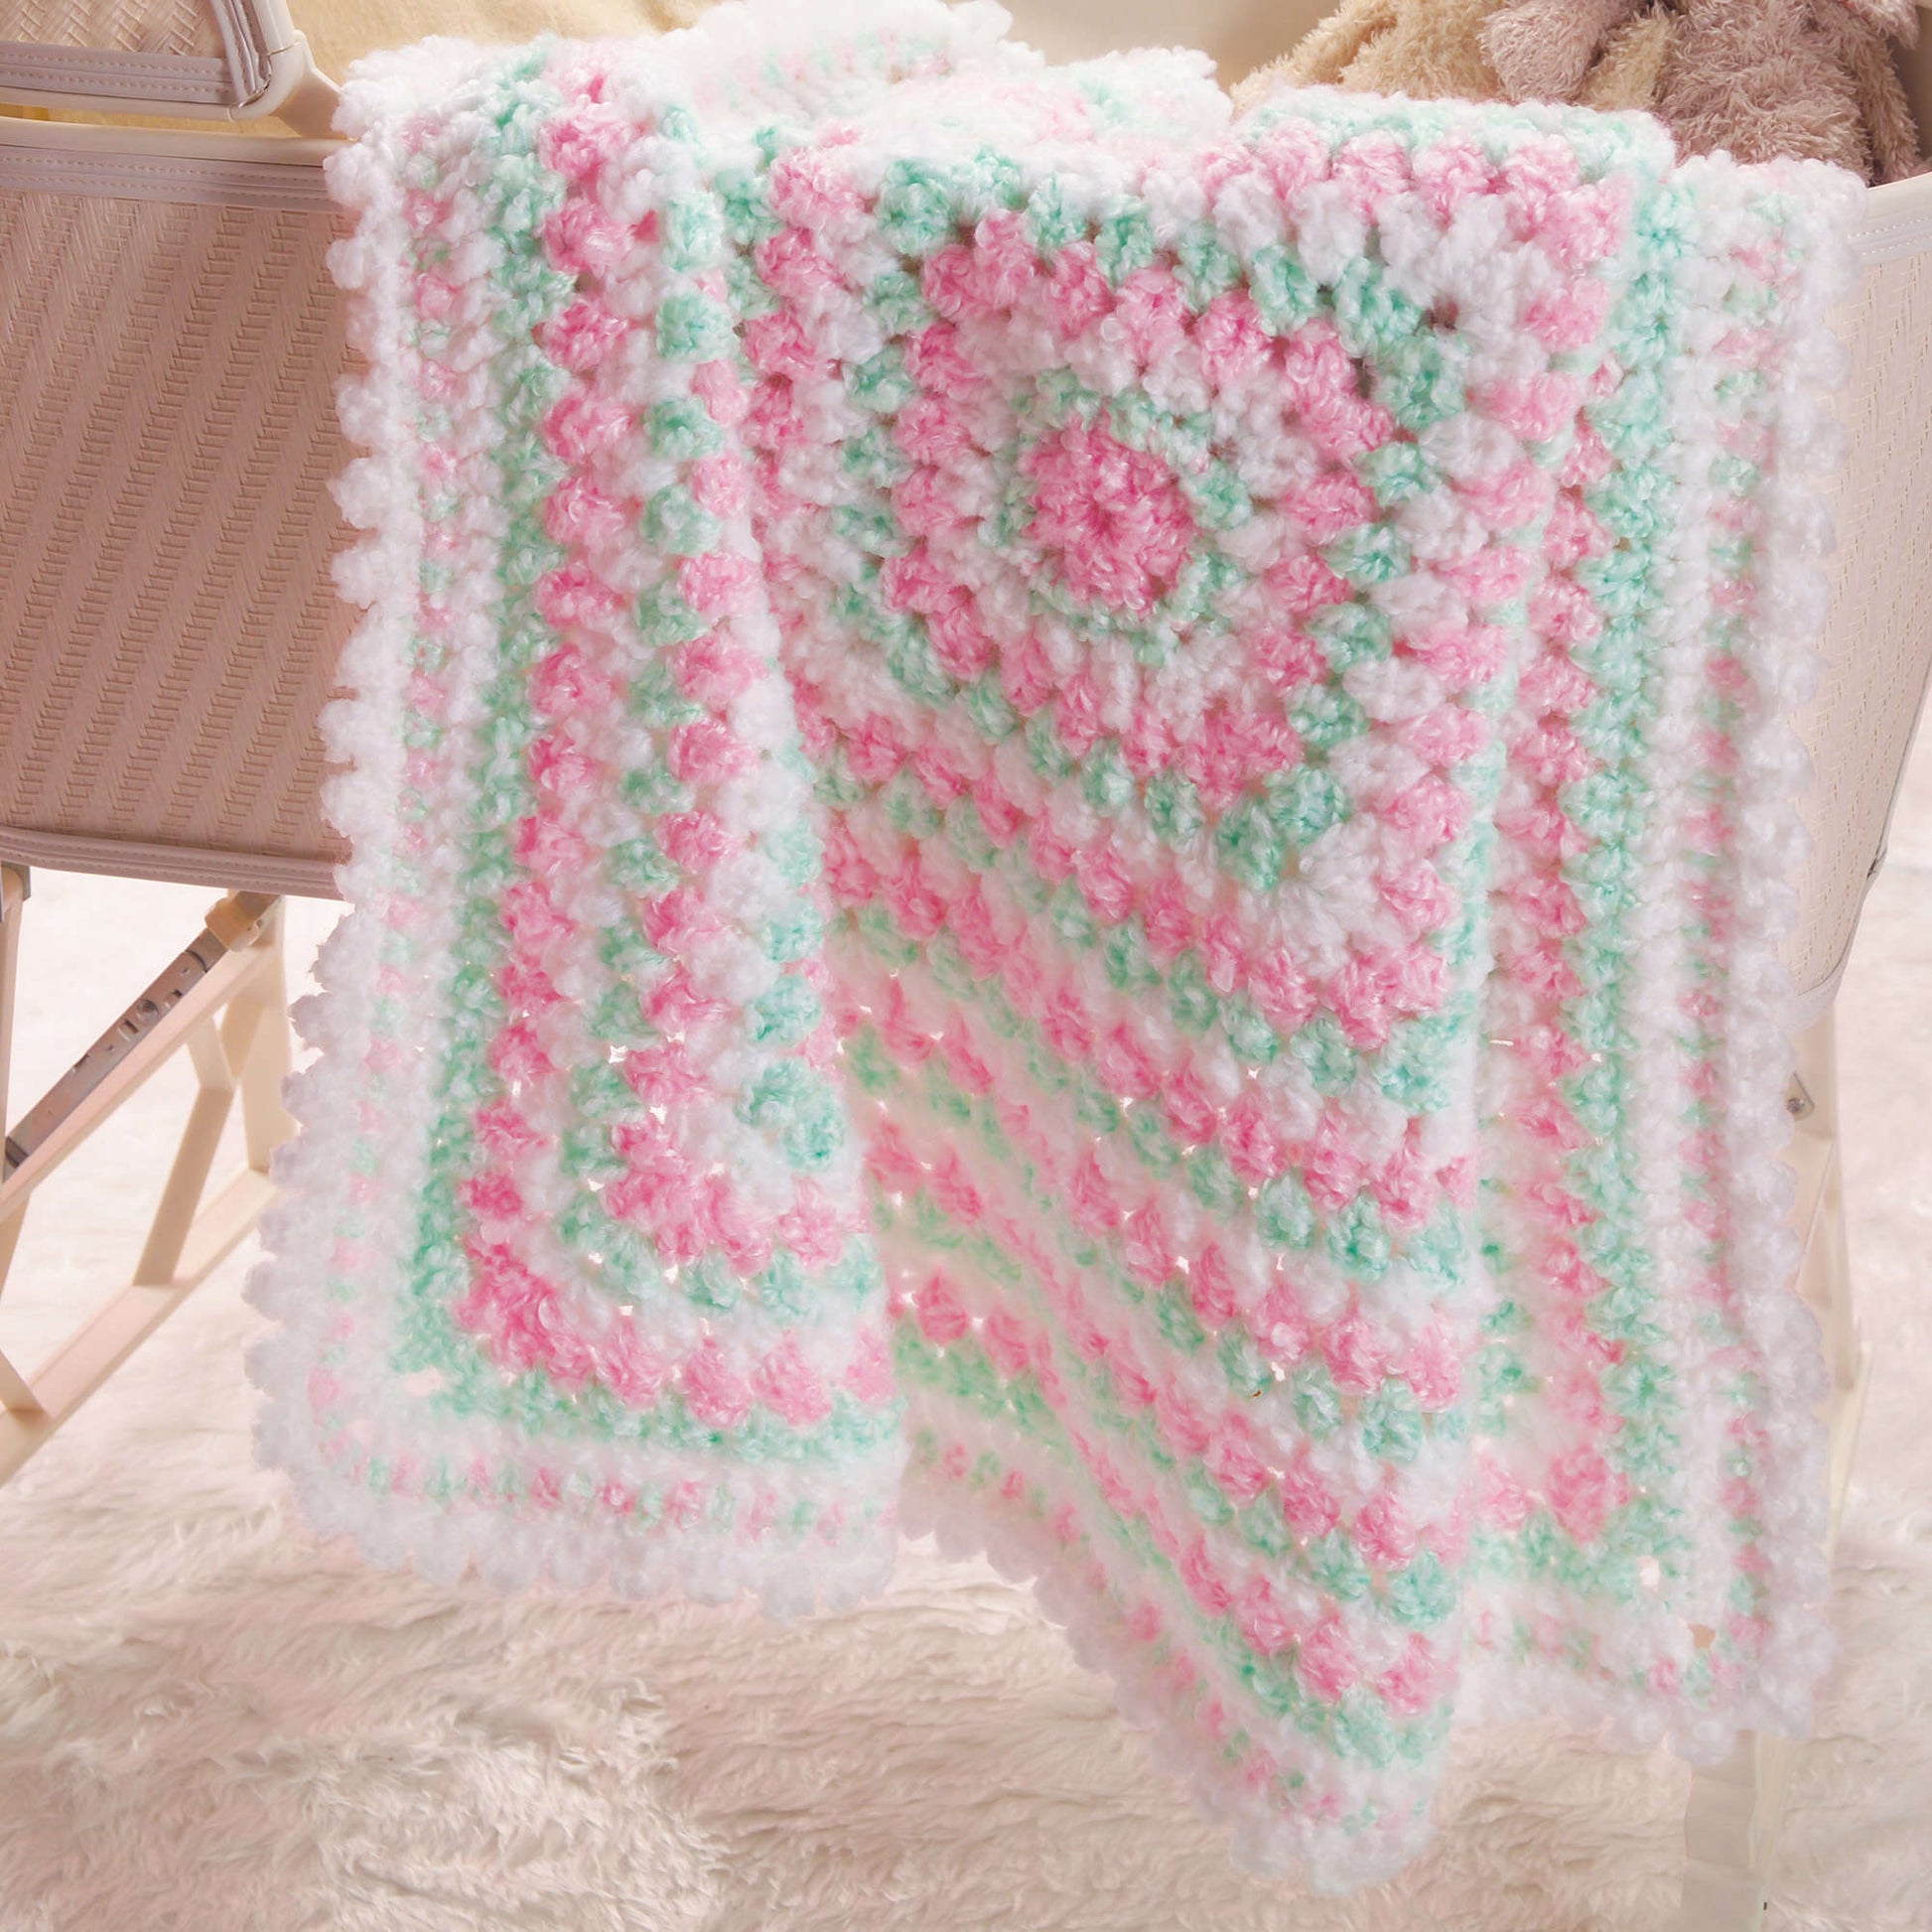 Free Red Heart Baby's First Blanket Crochet Pattern